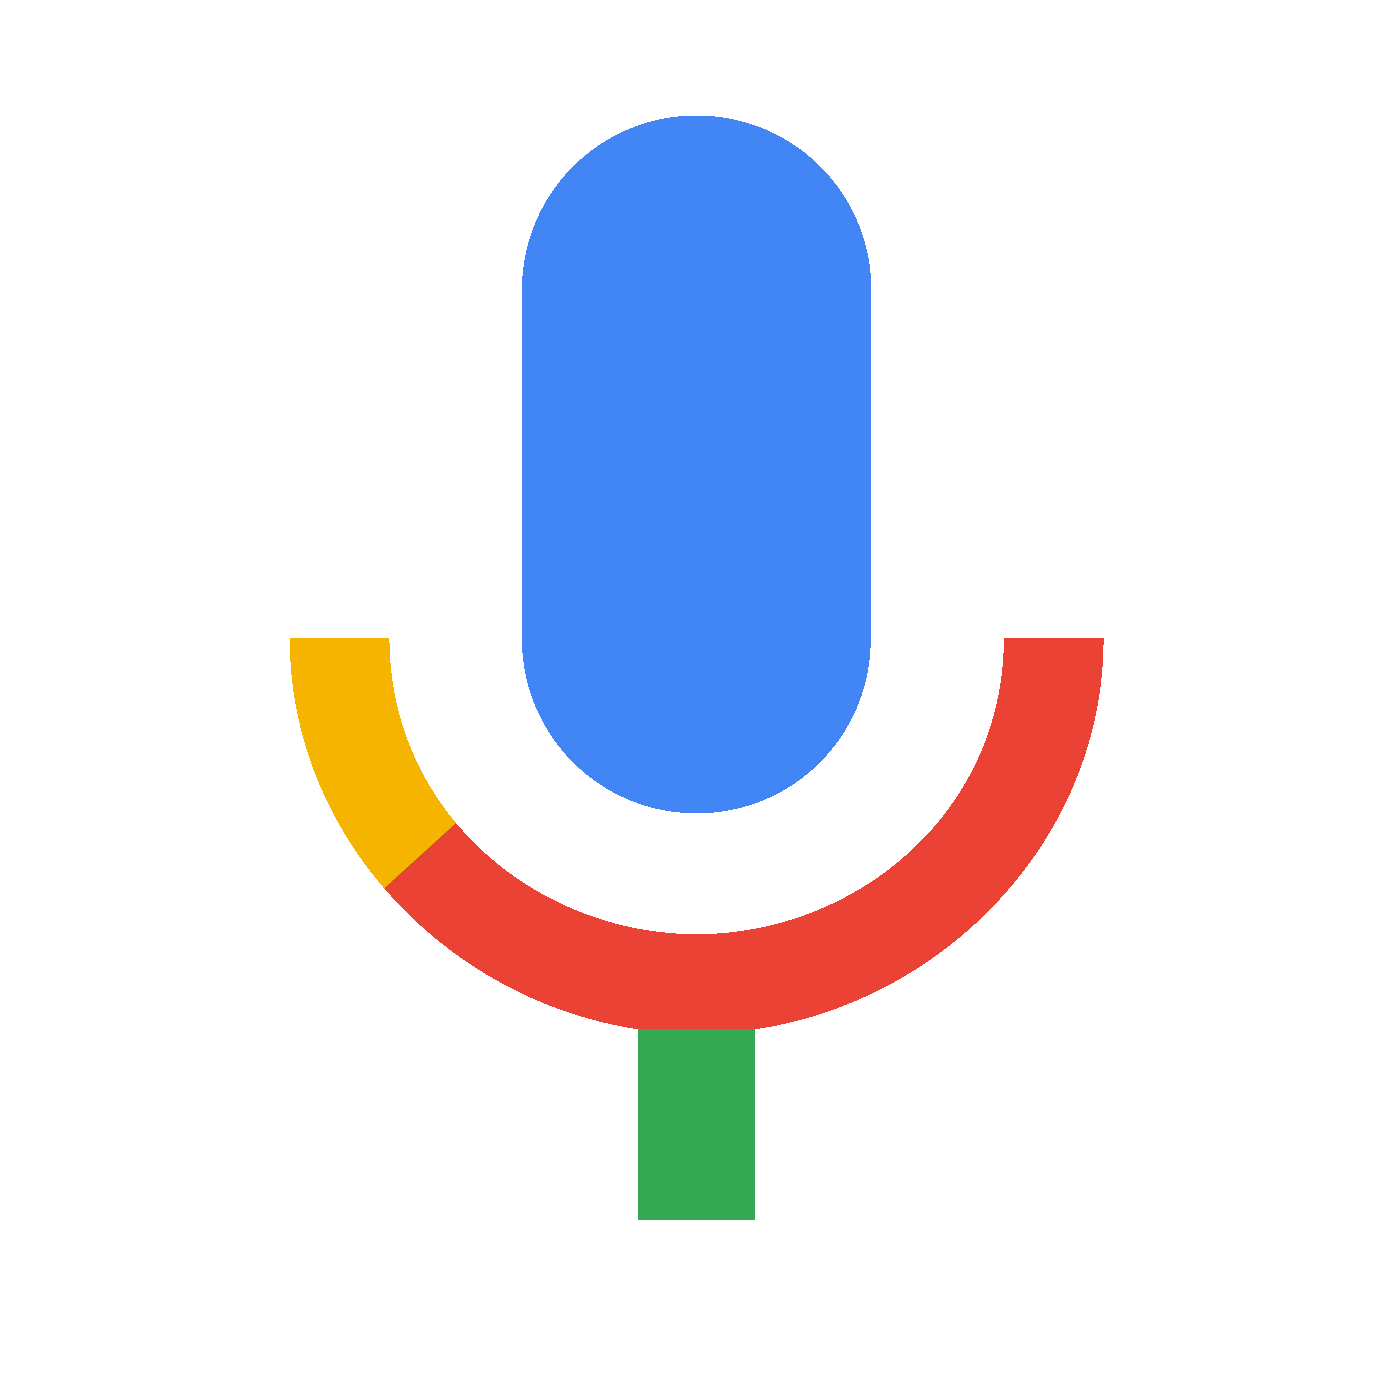 microphone clipart colourful